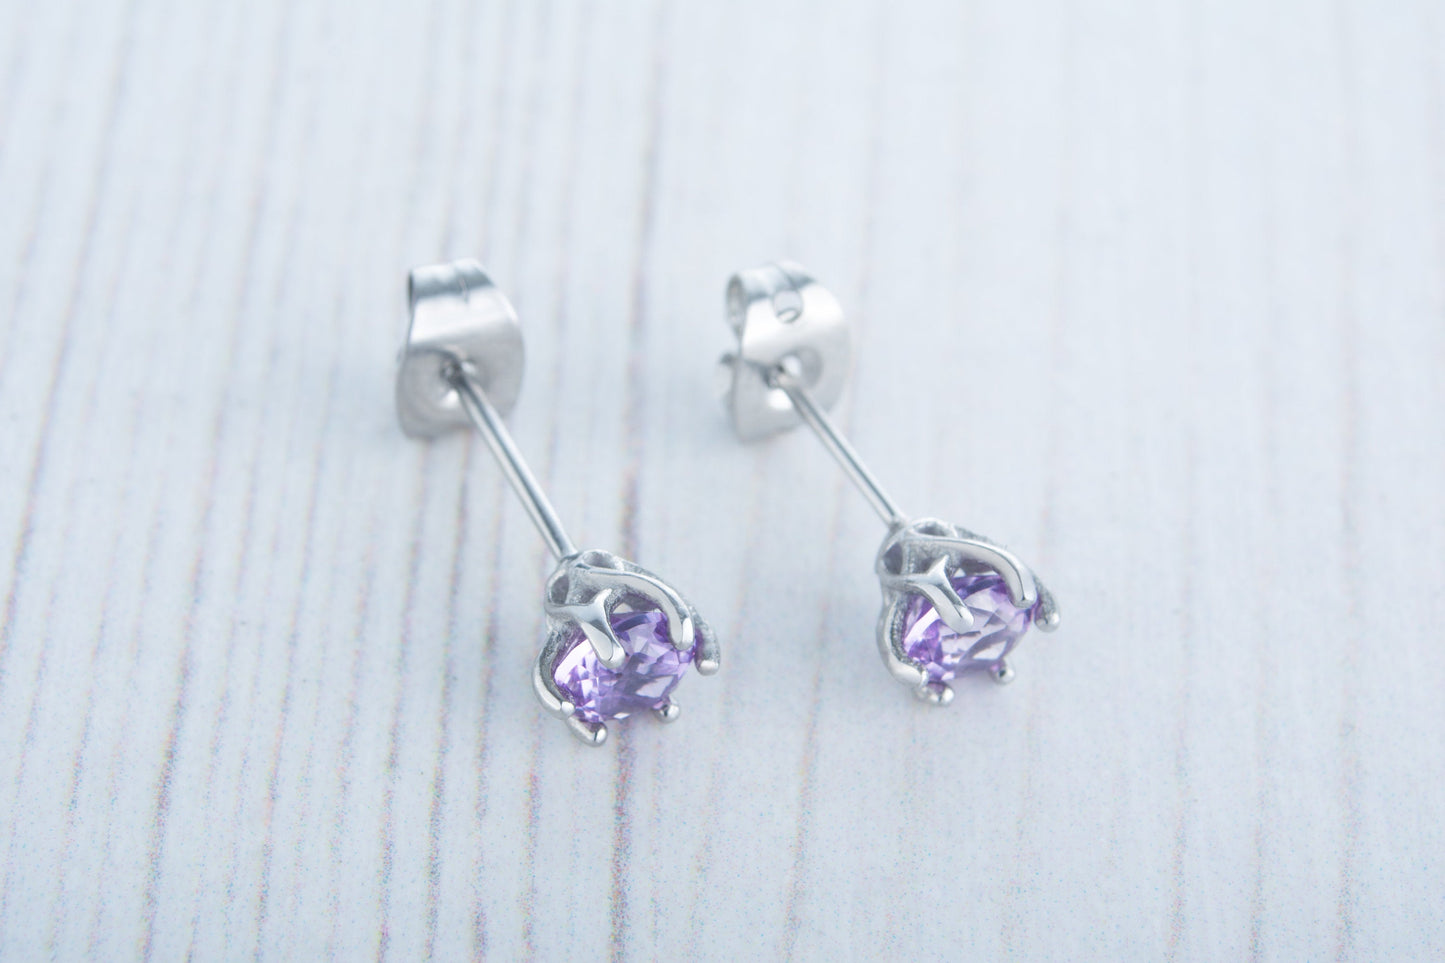 Lab Alexandrite stud earrings, available in titanium, white gold and surgical steel 4mm, 5mm or 6mm sizes